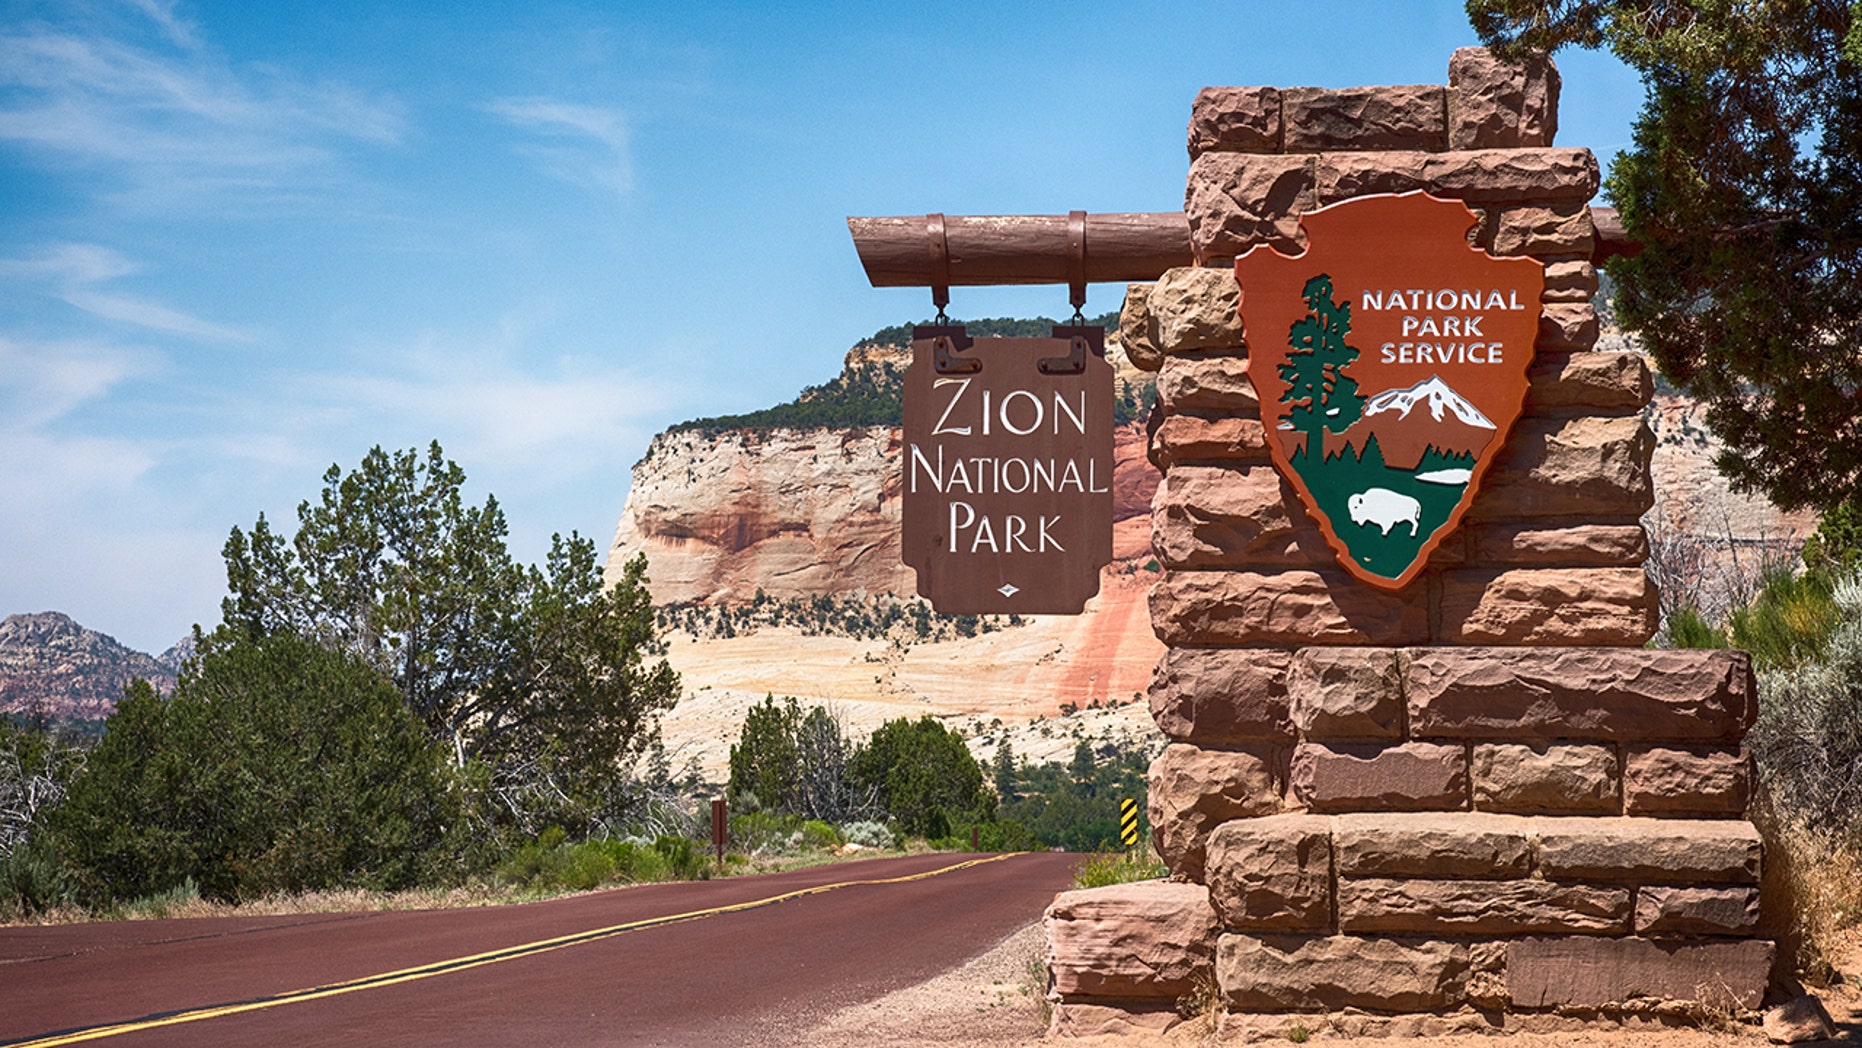 The man was stuck in quicksand at Zion National Park for hours.